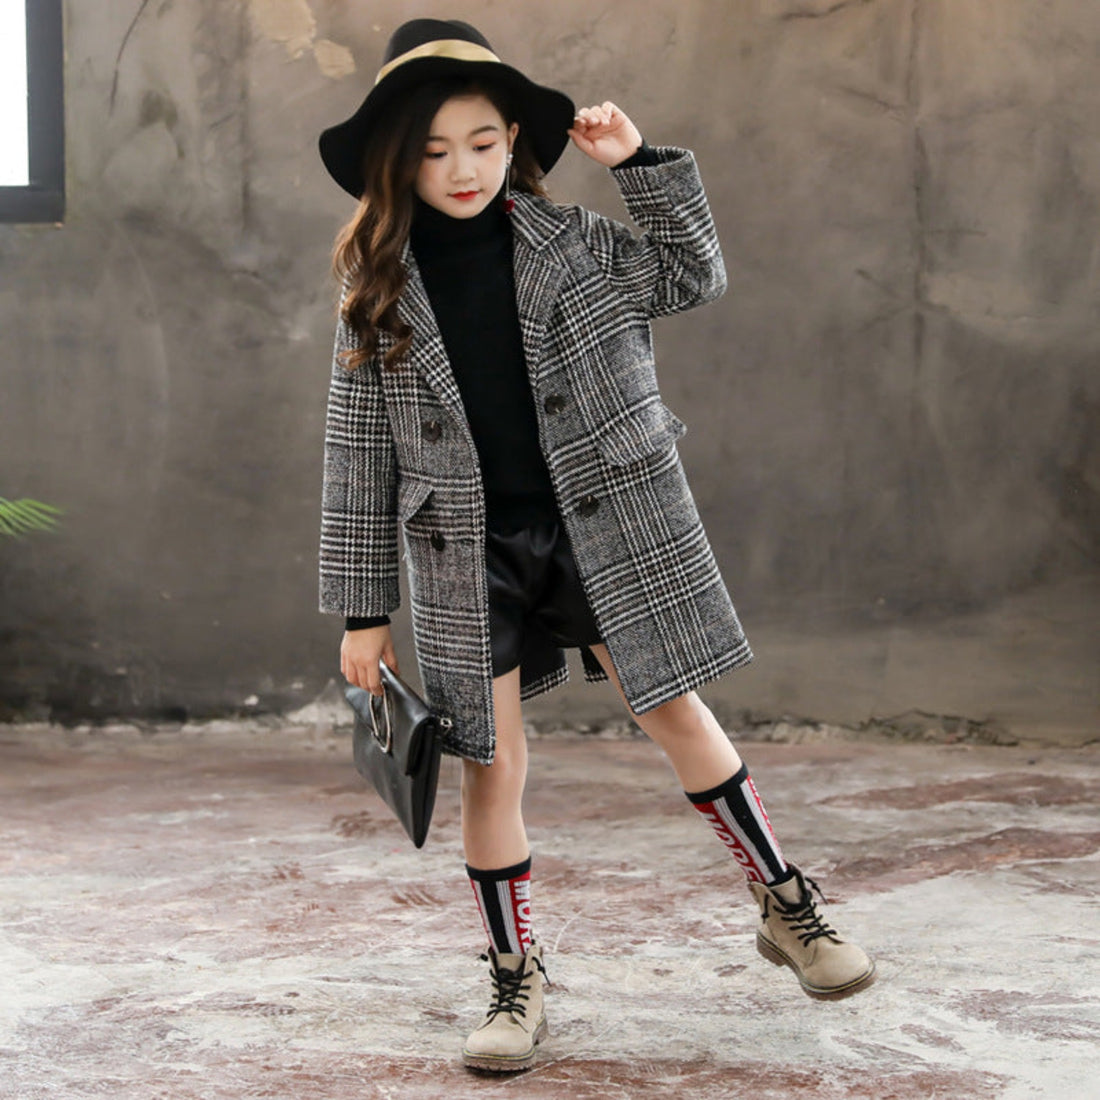 A girl staying warm in a gray plaid houndstooth coat during winter.